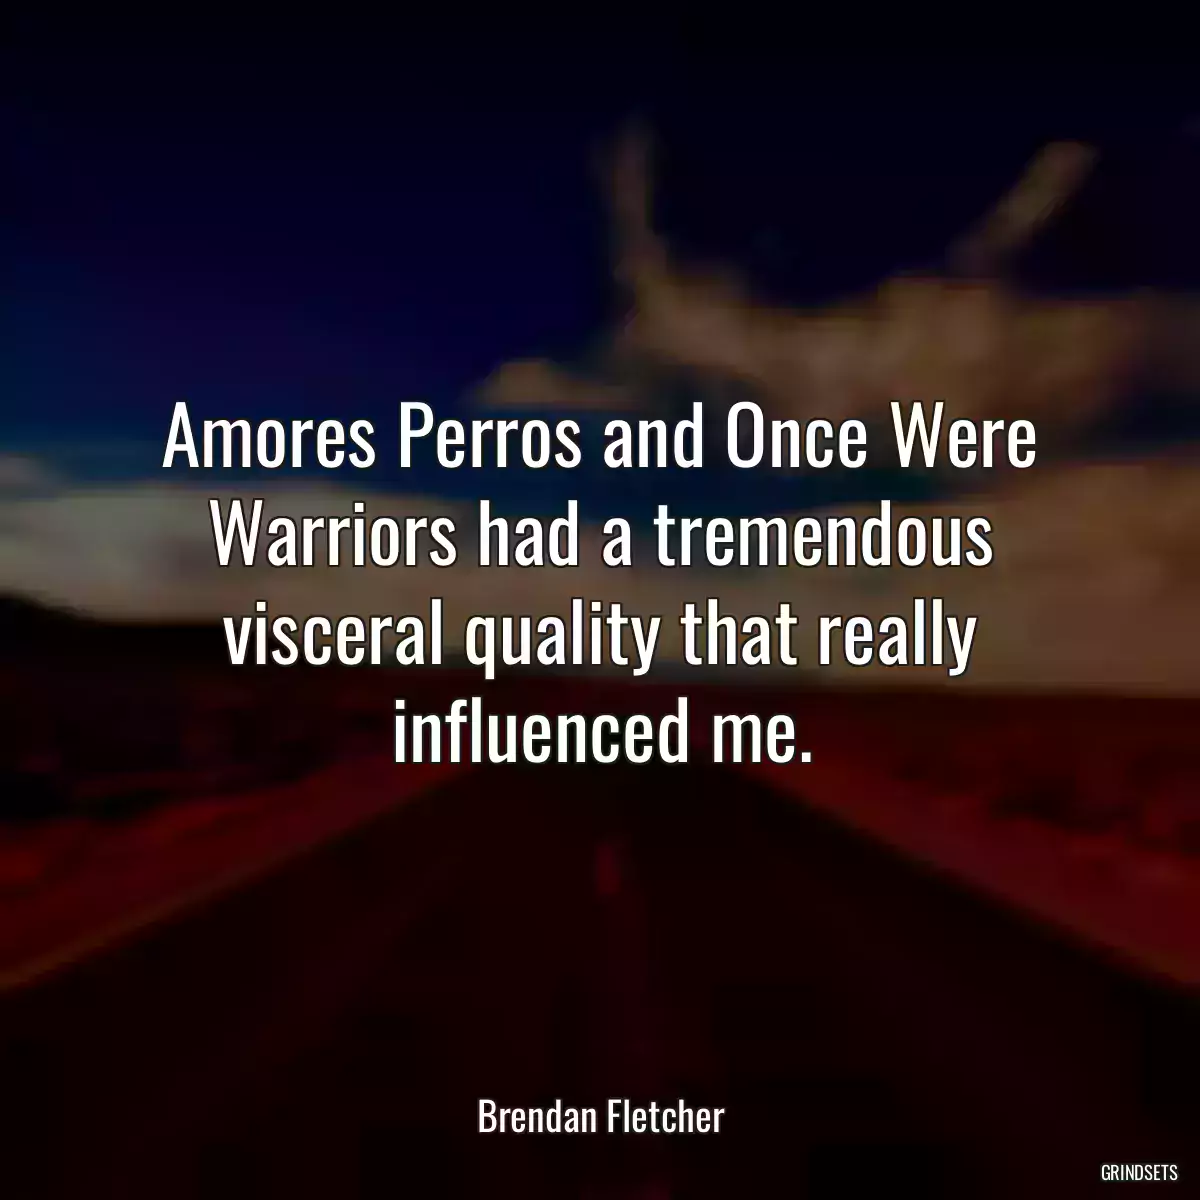 Amores Perros and Once Were Warriors had a tremendous visceral quality that really influenced me.